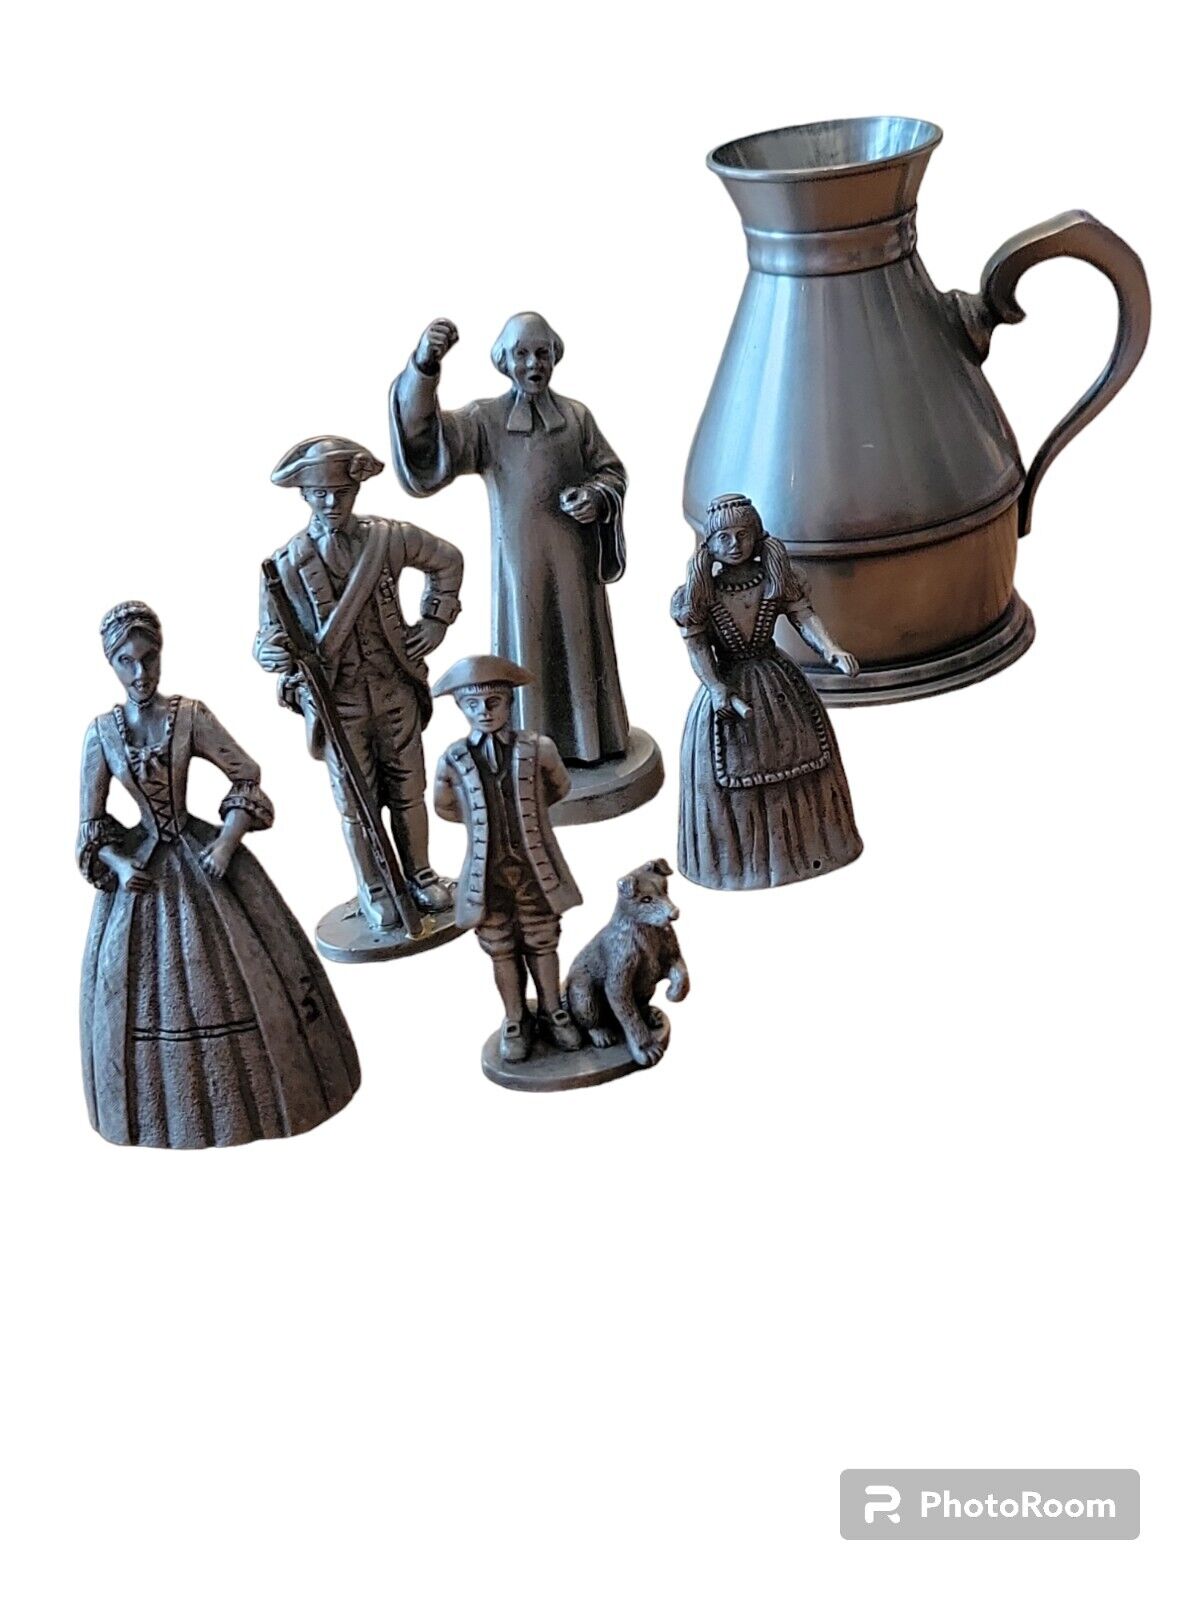 Pewter Miniatures Fort, Hudson, Thomas Williams Figurines & Pitcher Lot Of 6